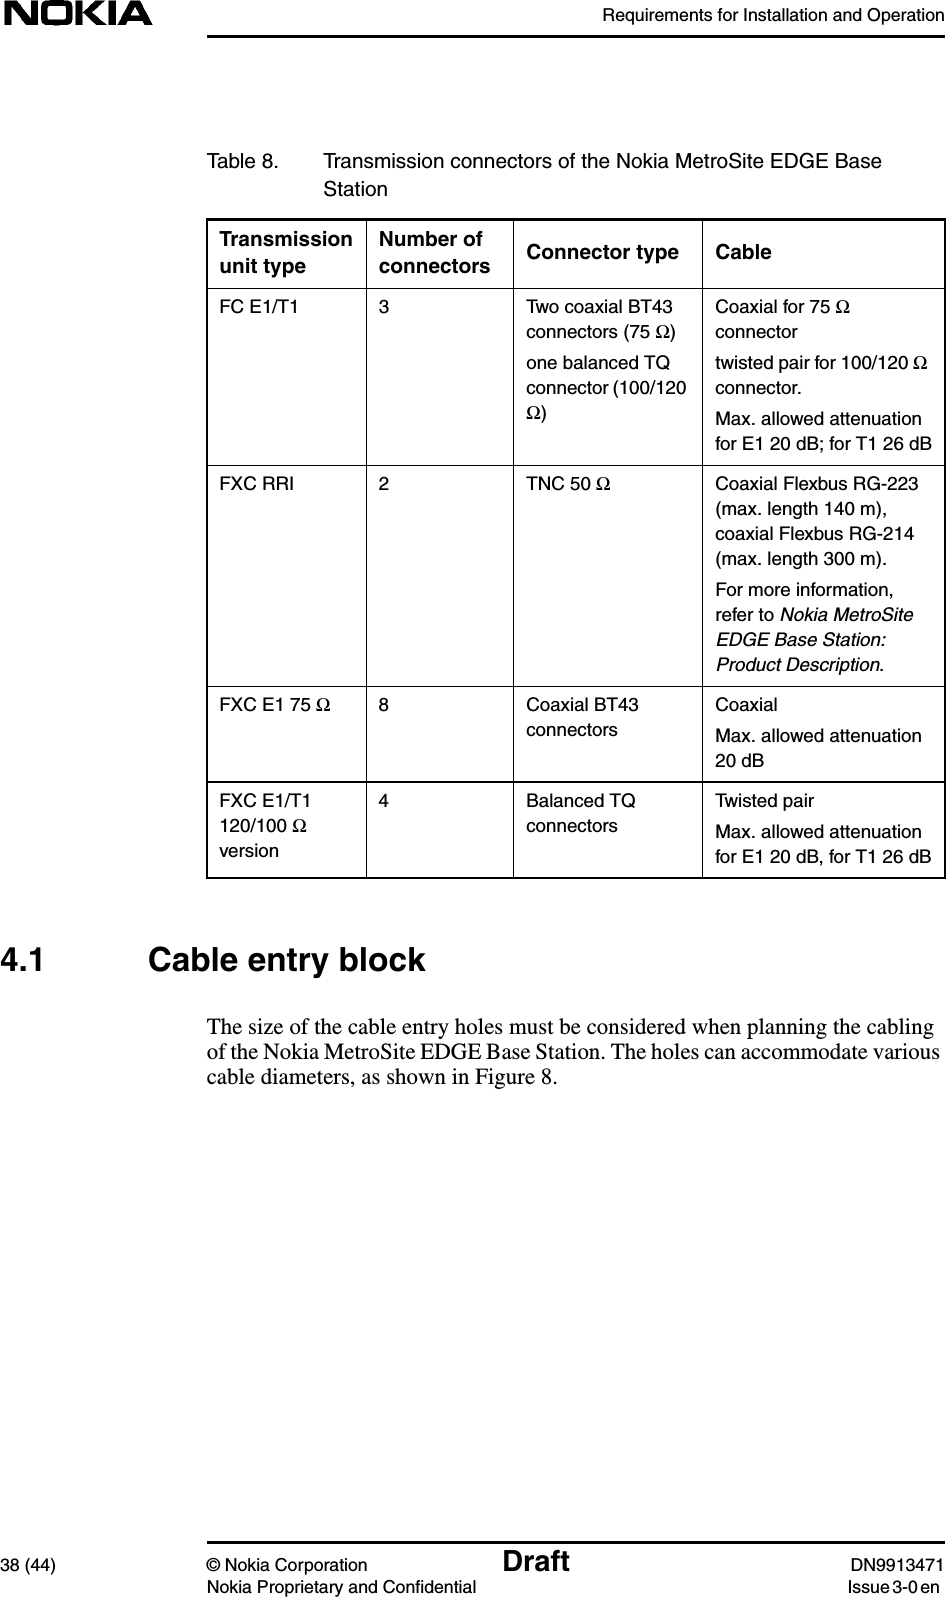 Requirements for Installation and Operation38 (44) © Nokia Corporation Draft DN9913471Nokia Proprietary and Confidential Issue 3-0 en4.1 Cable entry blockThe size of the cable entry holes must be considered when planning the cablingof the Nokia MetroSite EDGE Base Station. The holes can accommodate variouscable diameters, as shown in Figure 8.Table 8. Transmission connectors of the Nokia MetroSite EDGE BaseStationTransmissionunit typeNumber ofconnectors Connector type CableFC E1/T1 3 Two coaxial BT43connectors (75 Ω)one balanced TQconnector (100/120Ω)Coaxial for 75 Ωconnectortwisted pair for 100/120 Ωconnector.Max. allowed attenuationfor E1 20 dB; for T1 26 dBFXC RRI 2 TNC 50 ΩCoaxial Flexbus RG-223(max. length 140 m),coaxial Flexbus RG-214(max. length 300 m).For more information,refer to Nokia MetroSiteEDGE Base Station:Product Description.FXC E1 75 Ω8 Coaxial BT43connectorsCoaxialMax. allowed attenuation20 dBFXC E1/T1120/100 Ωversion4 Balanced TQconnectorsTwisted pairMax. allowed attenuationfor E1 20 dB, for T1 26 dB